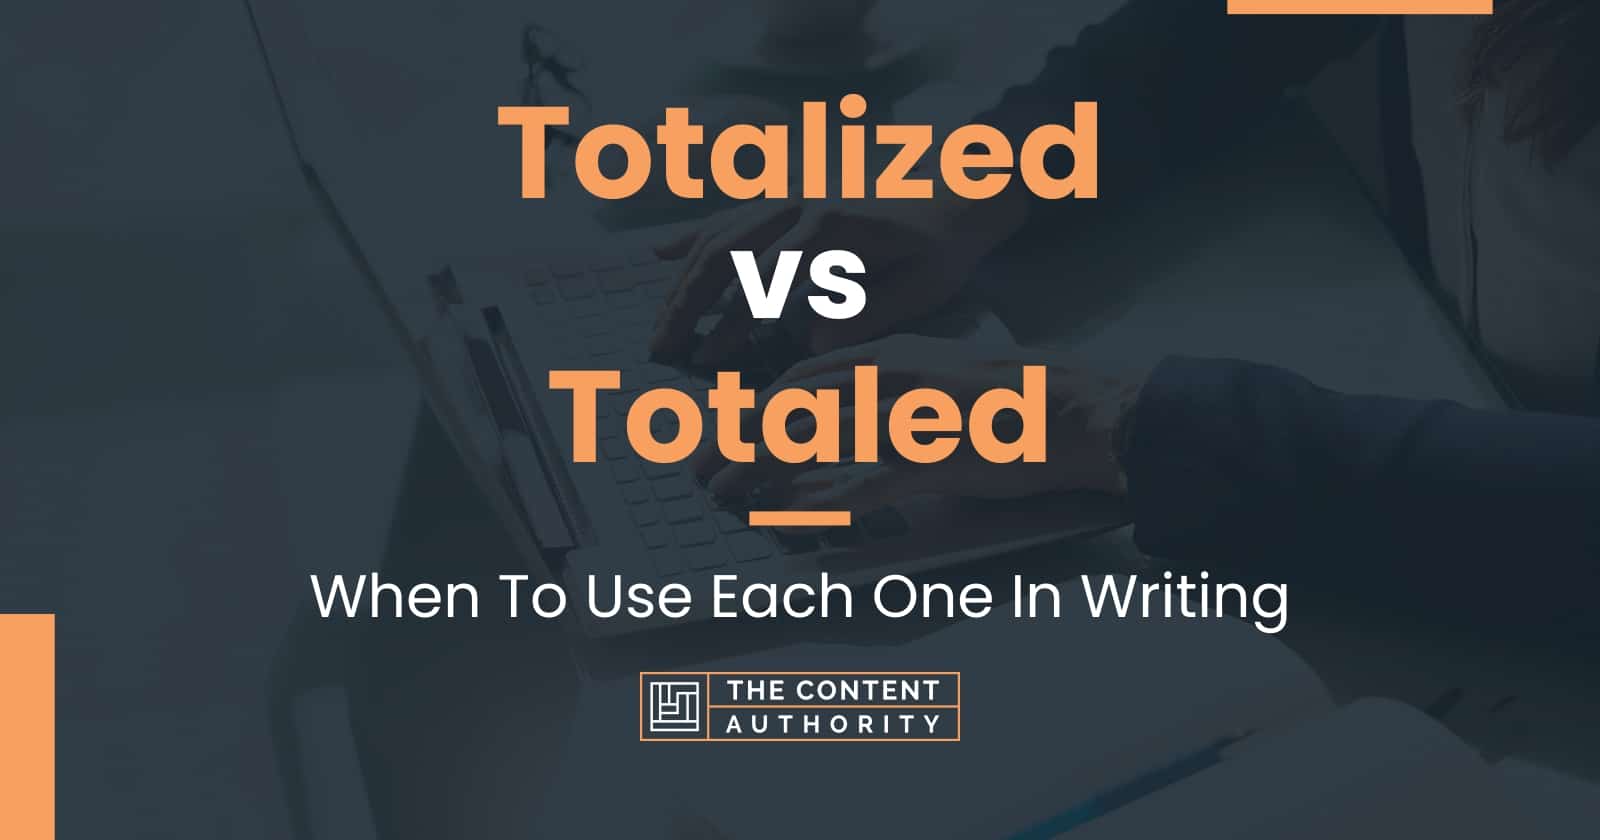 Totalized vs Totaled: When To Use Each One In Writing